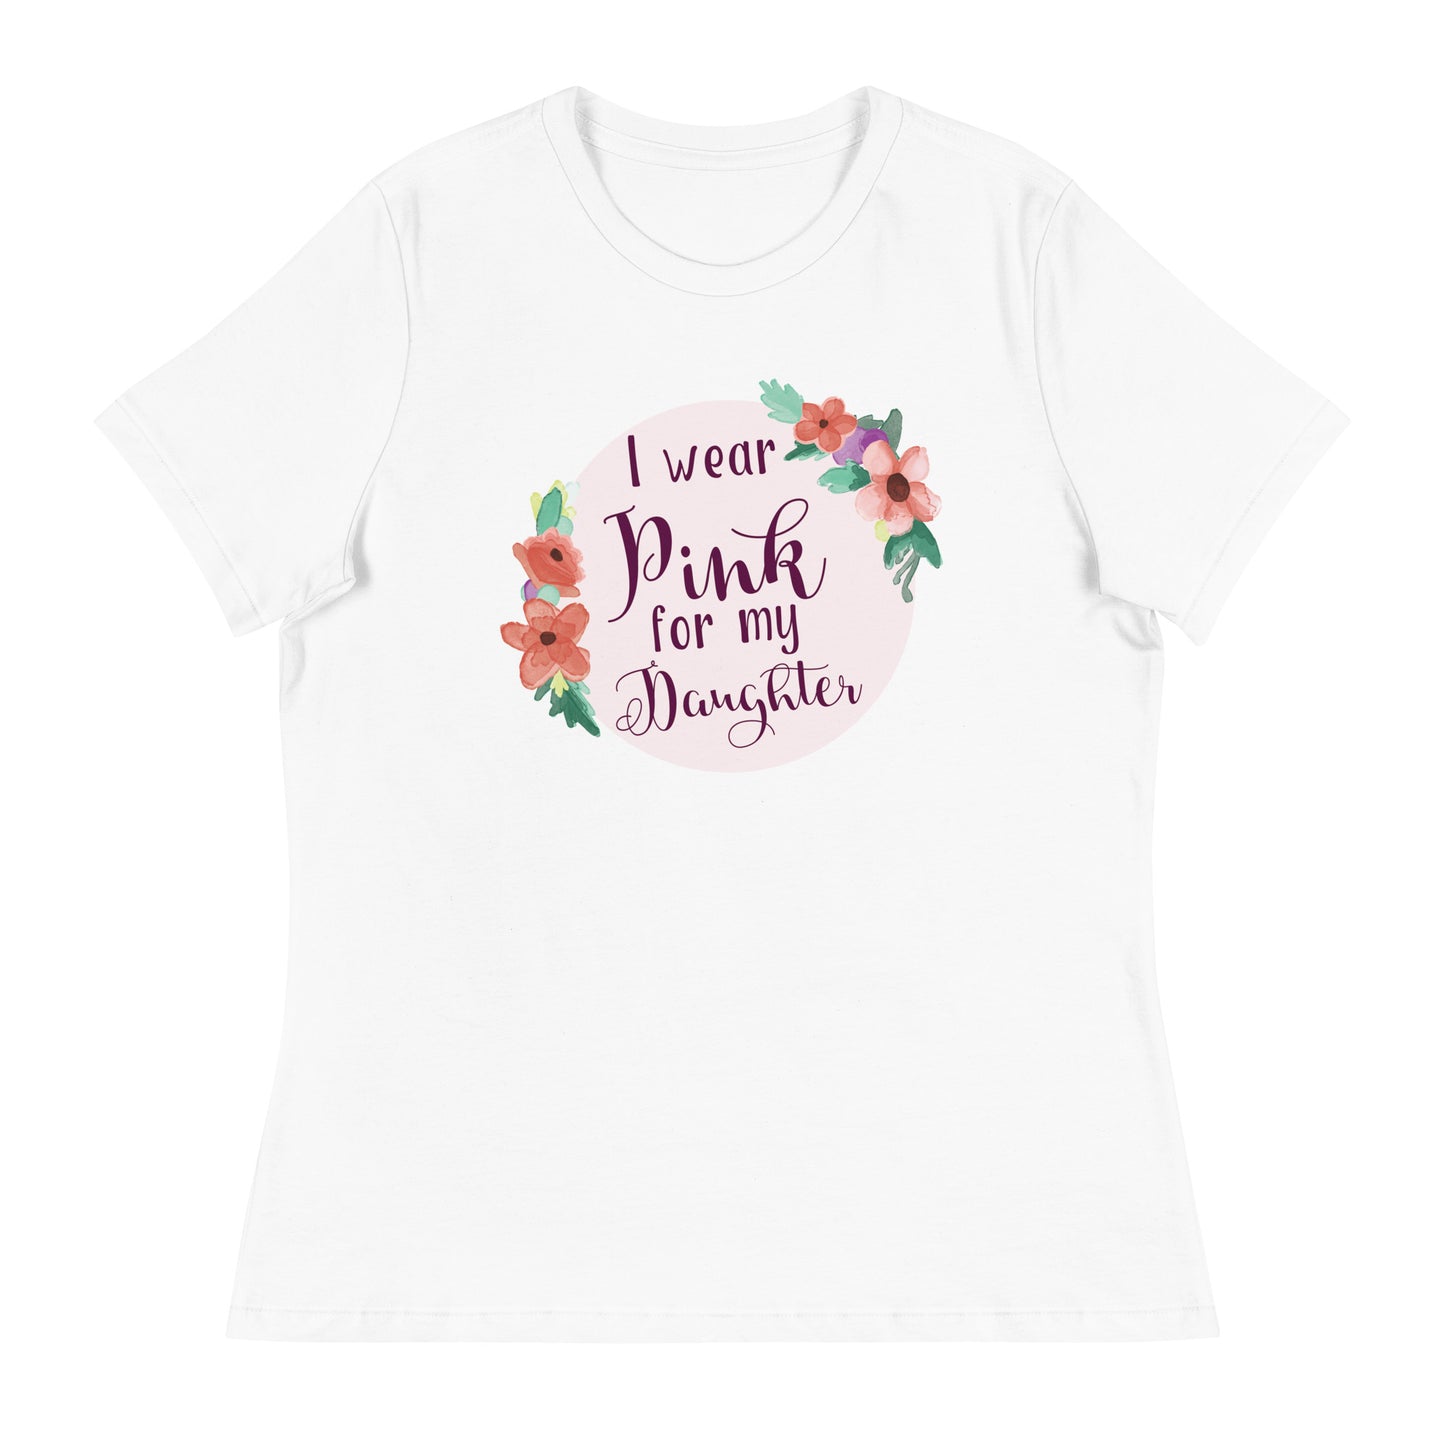 Pink For My Daughter Women's Relaxed T-Shirt